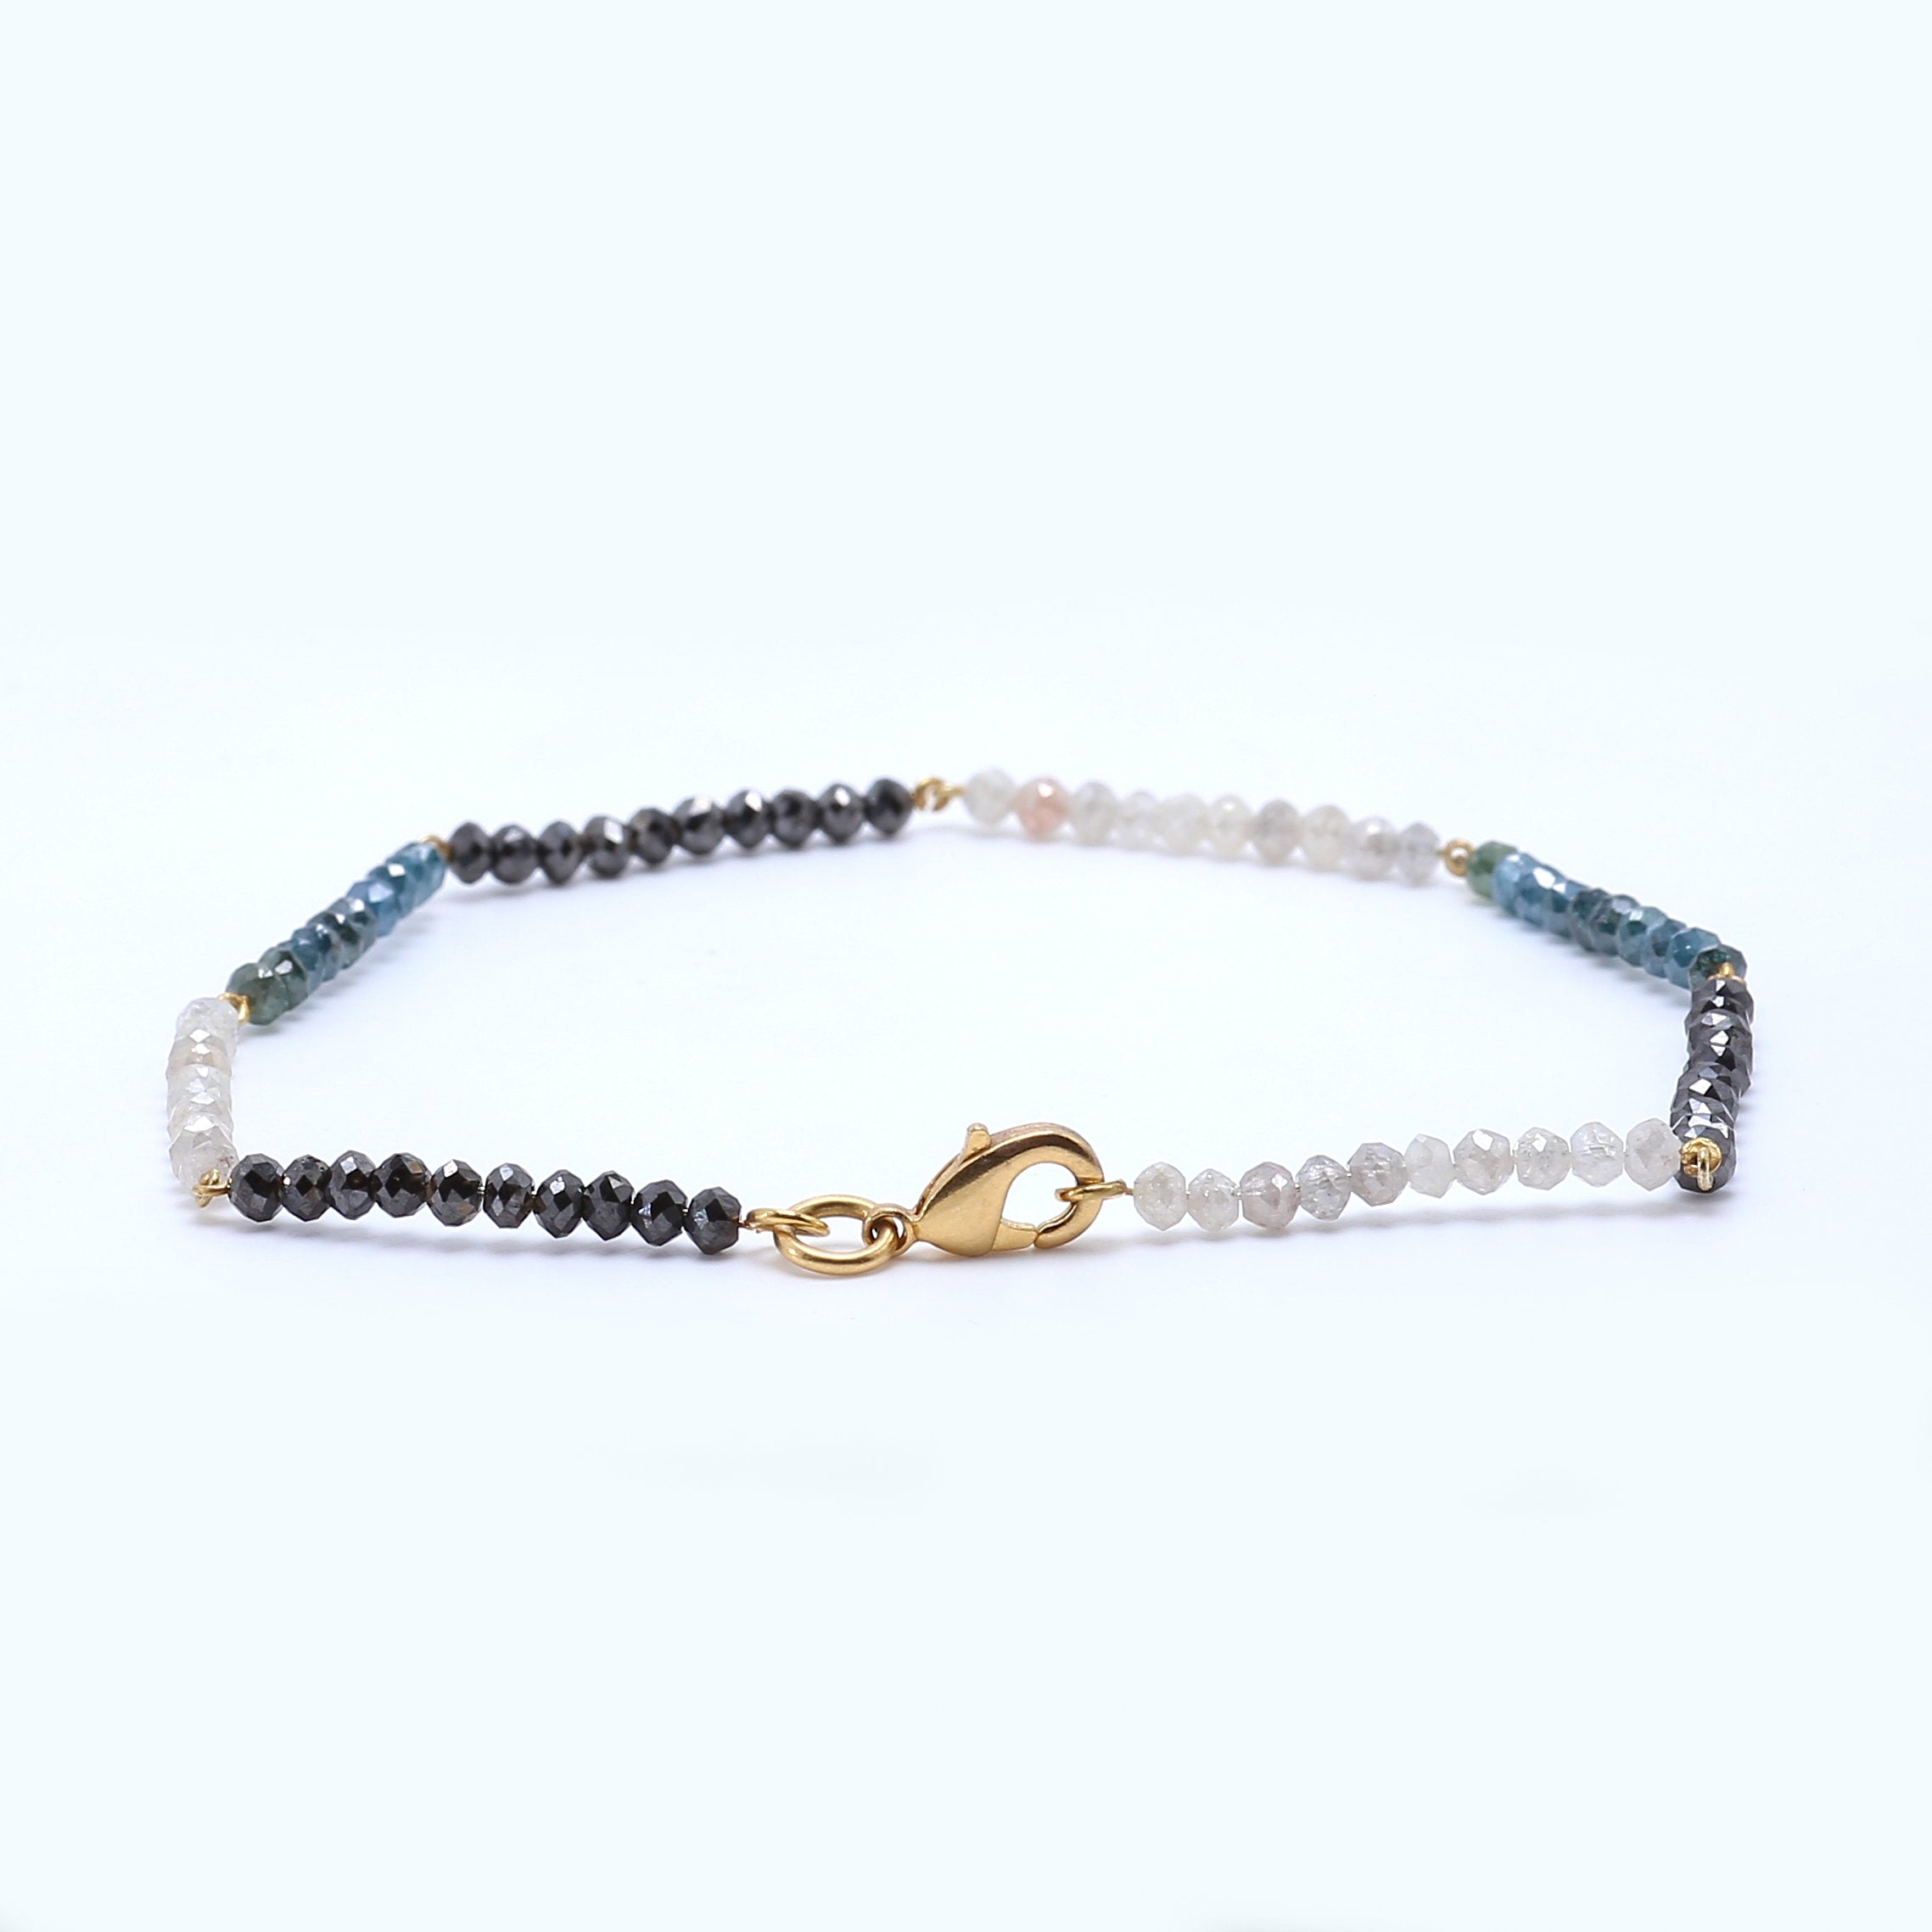 10 CT Round White Black Blue Color Bead Diamond Bracelet With 14 K Solid Rose White Yellow Gold String lock  Engagement Wedding Gift KD870